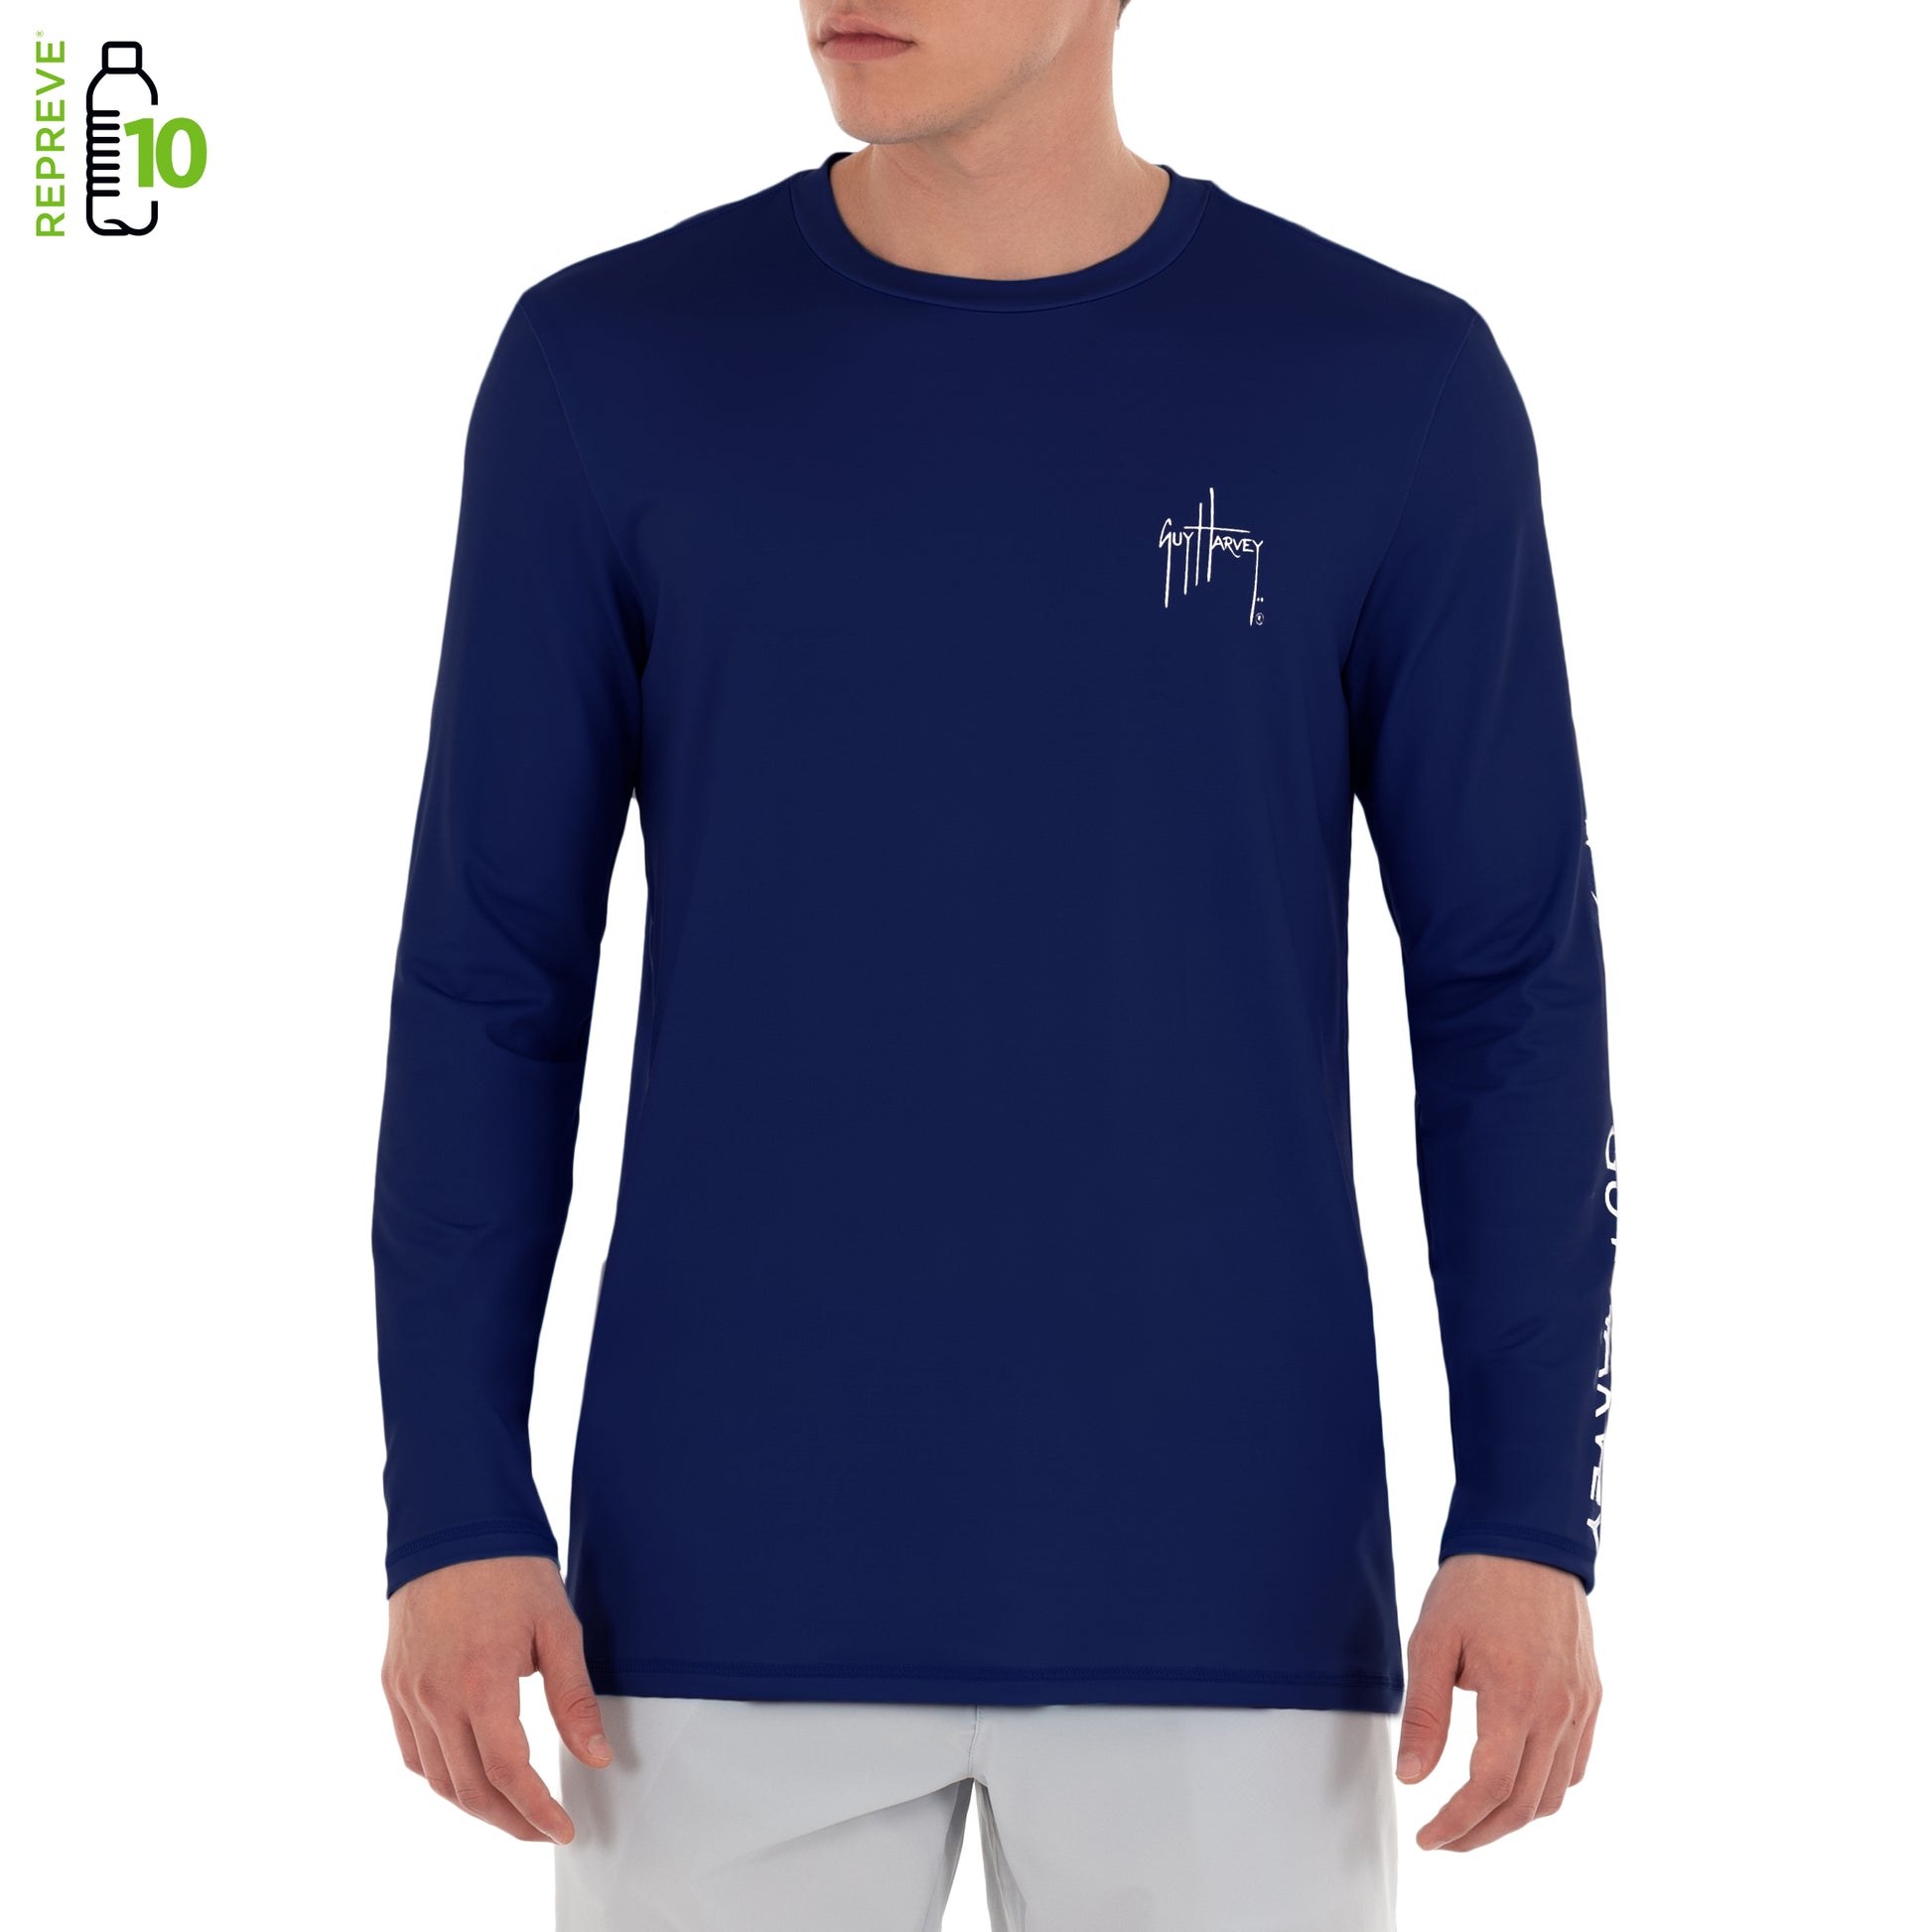 Men's Core Solid Long Sleeve Sun Protection Navy Shirt